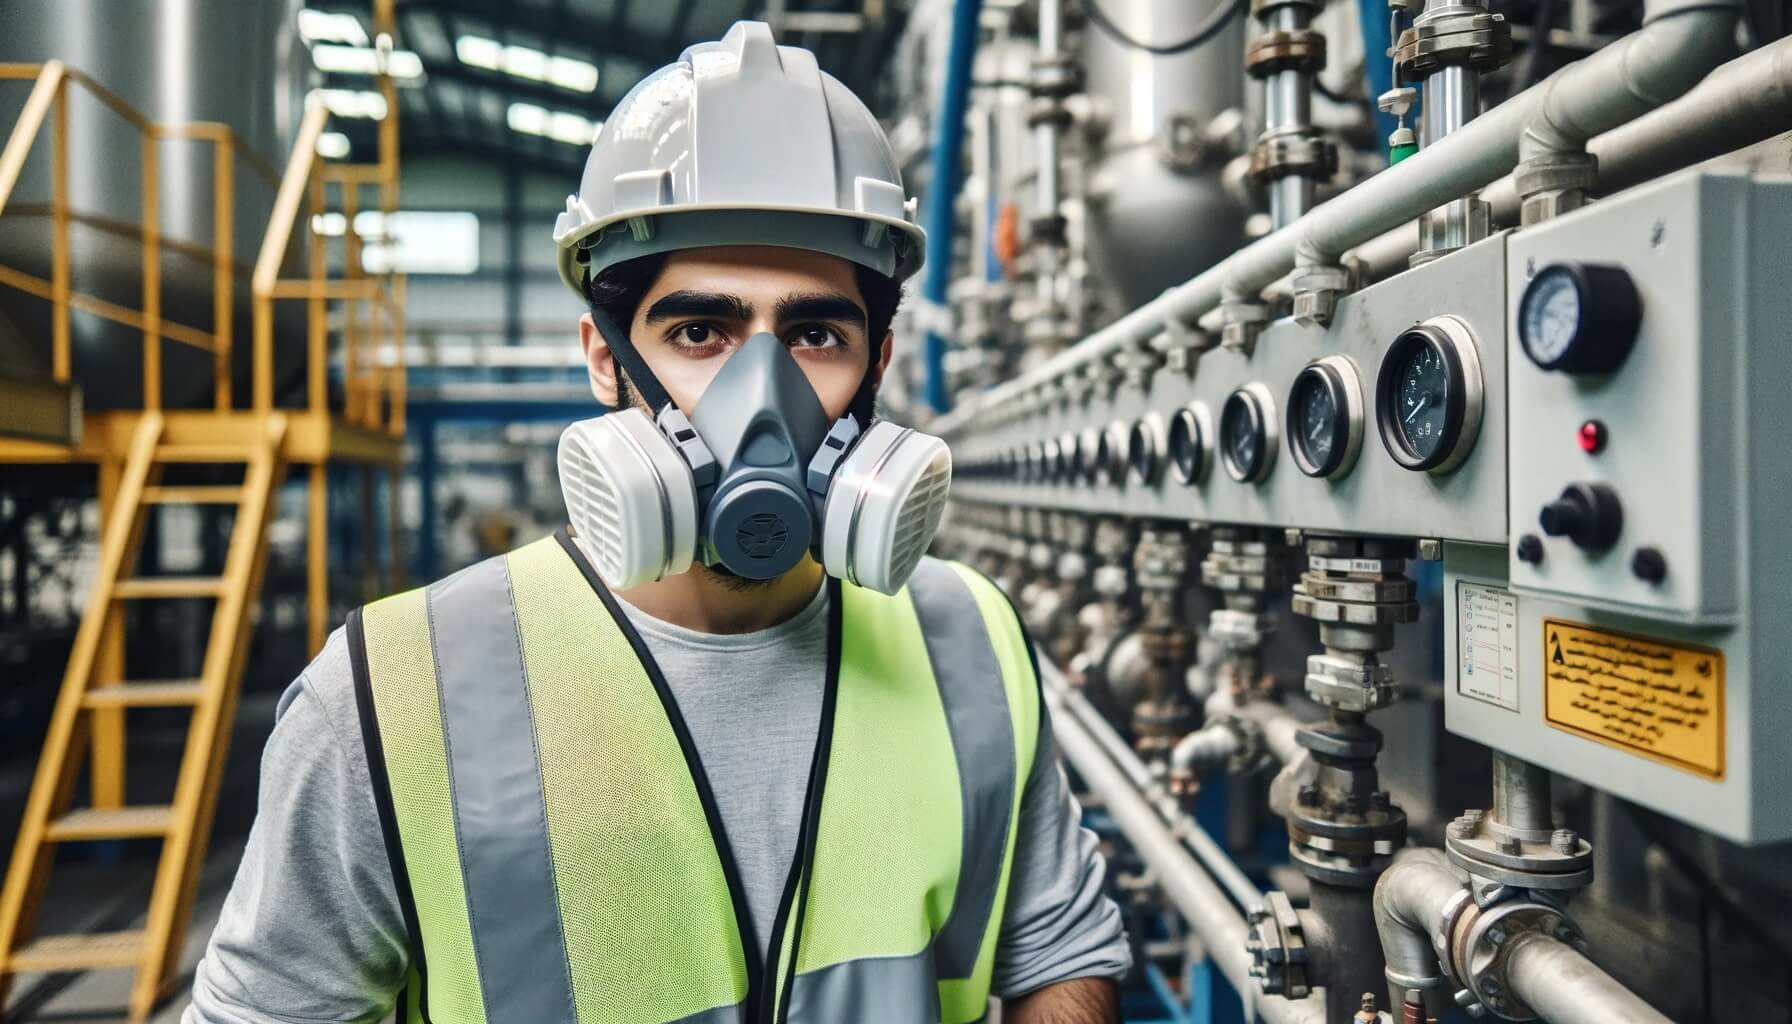 How to Clean, Maintain, and Extend the Life of Respirator